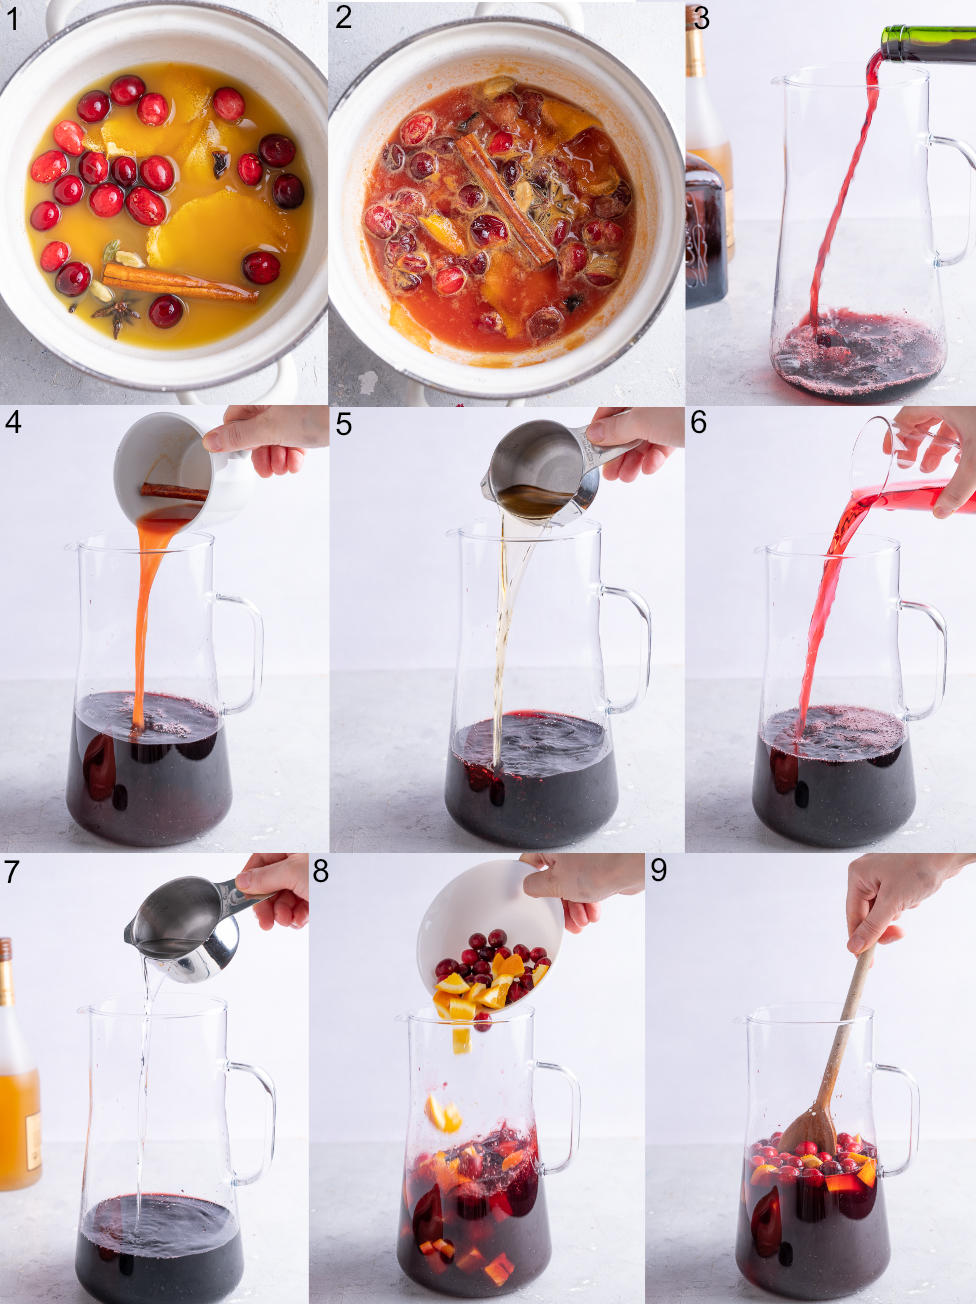 A collage of 9 photos showing how to make Christmas sangria step by step.